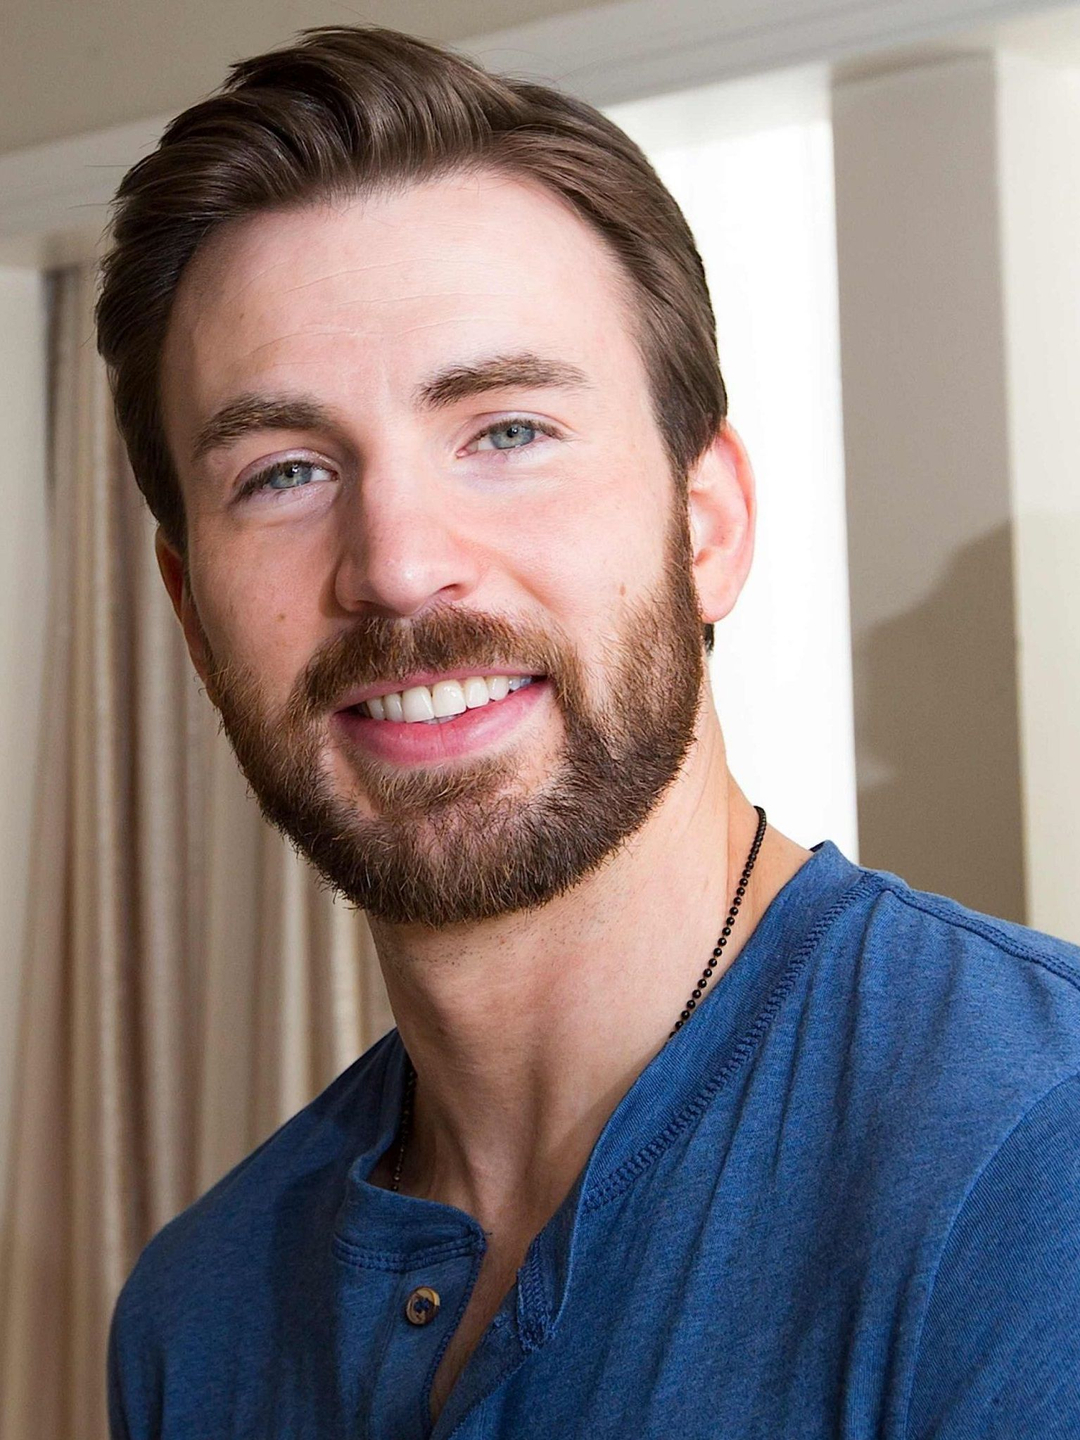 Chris Evans who is his mother